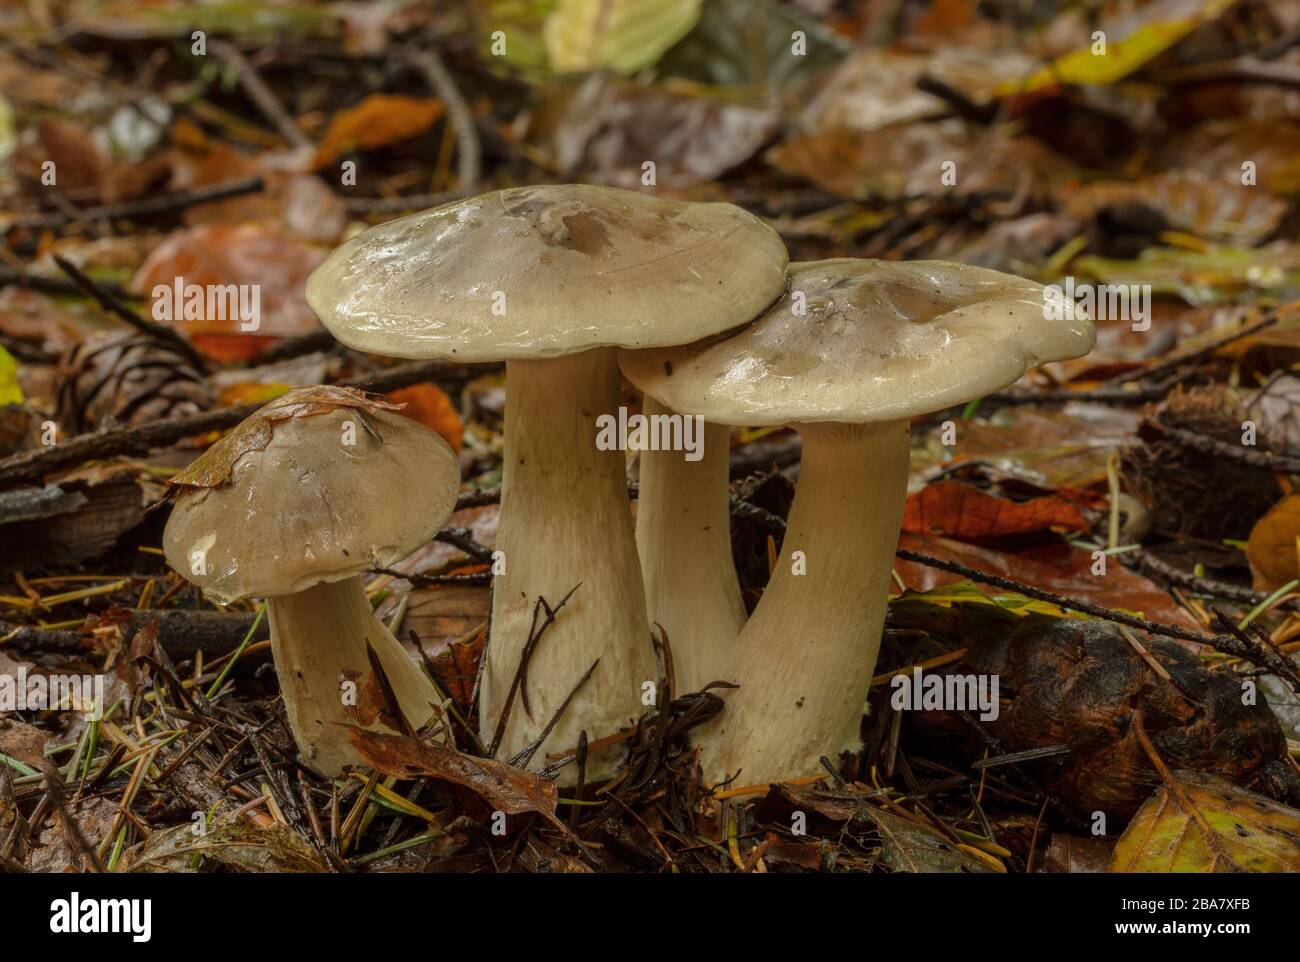 Clump of Clouded agaric or Clouded funnel, Clitocybe nebularis, in deciduous woodland. Stock Photo